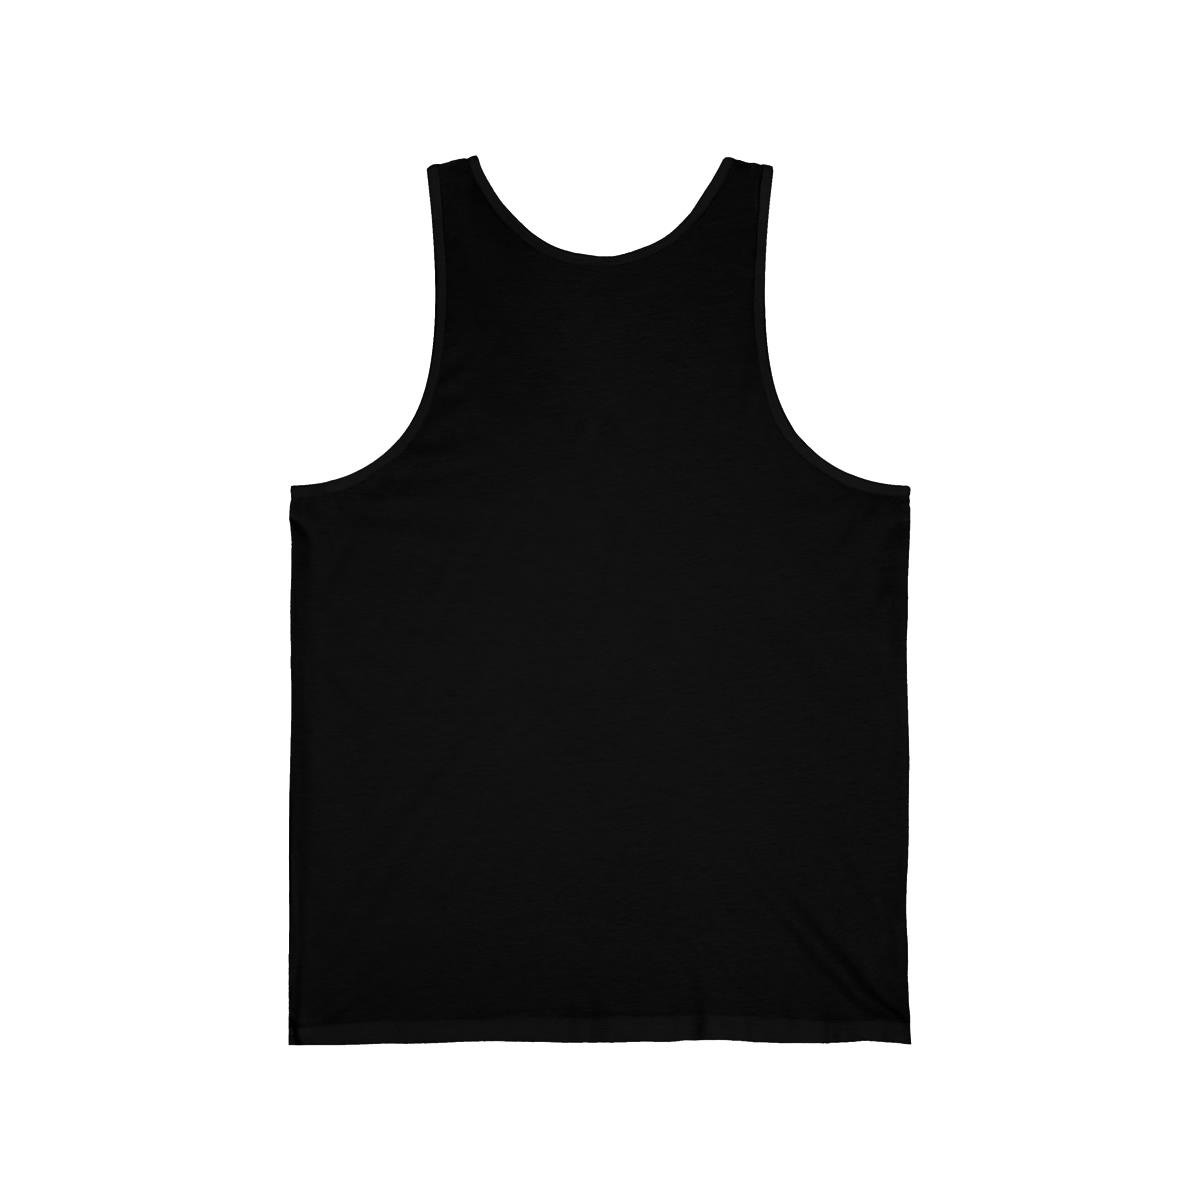 R.A.I.D – The Strong Survive Jersey Tank Top